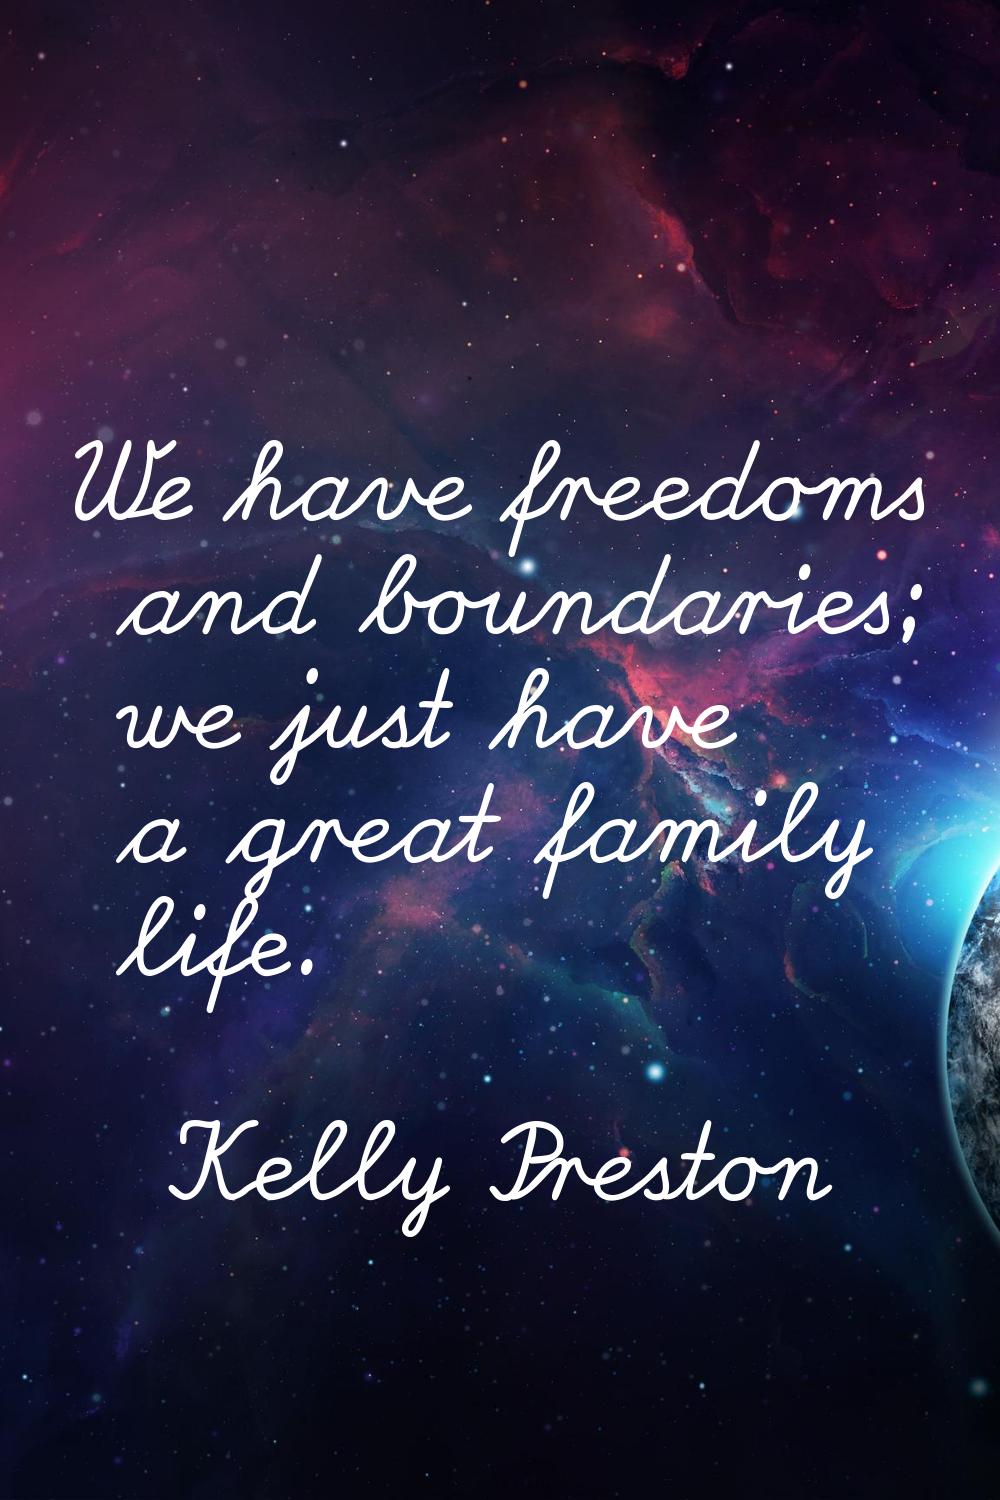 We have freedoms and boundaries; we just have a great family life.